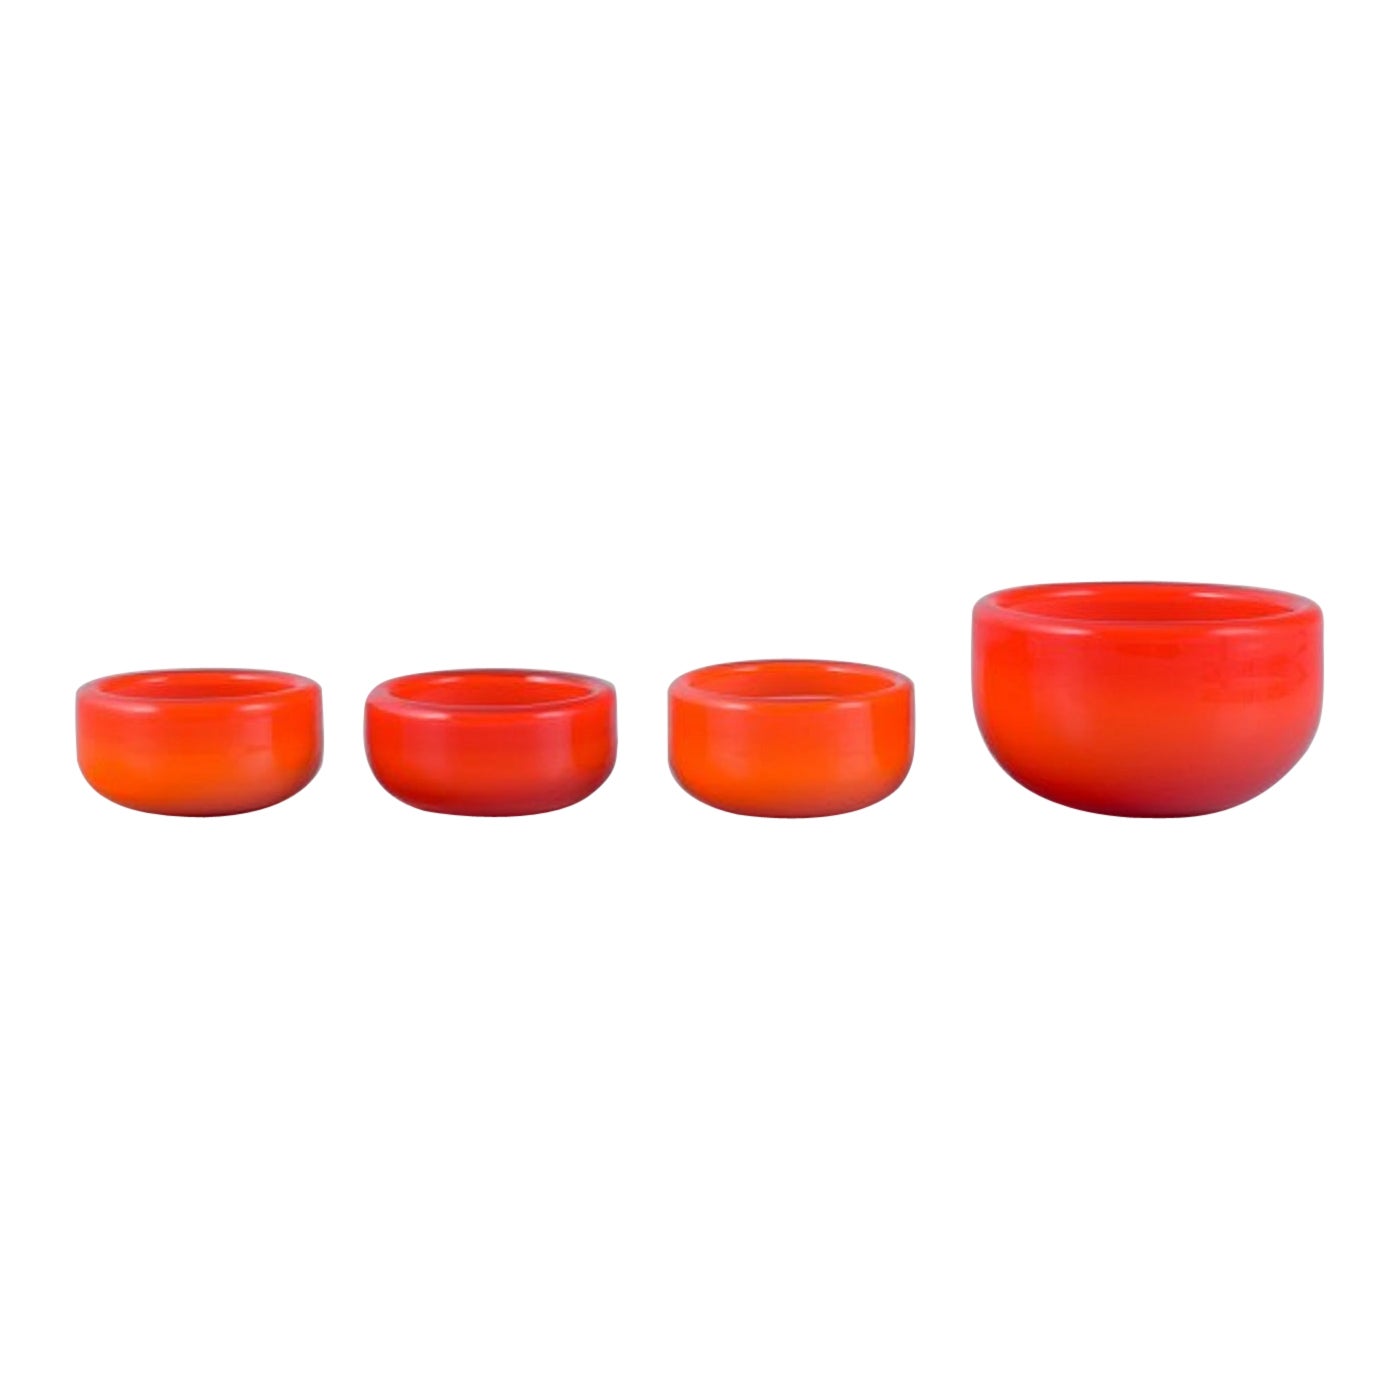 Michael Bang for Holmegaard, Four Glass Bowls in Orange and White Art Glass For Sale